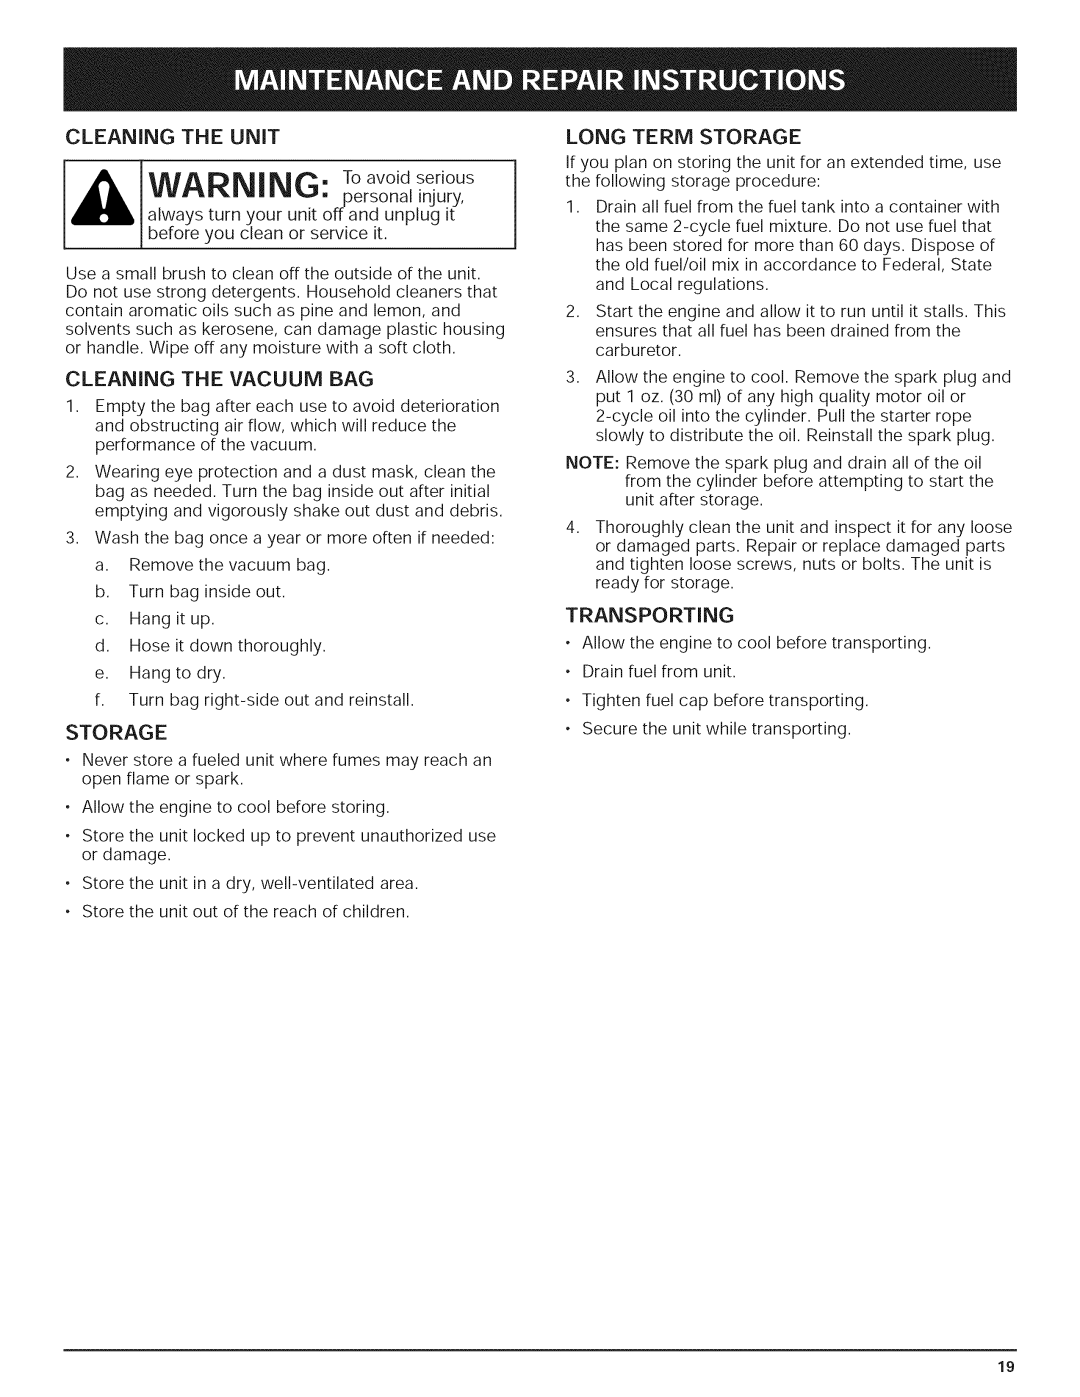 Yard-Man 769.01408 manual WARNING Toovoidserious, Cleaning The Unit, Storage, Transporting 